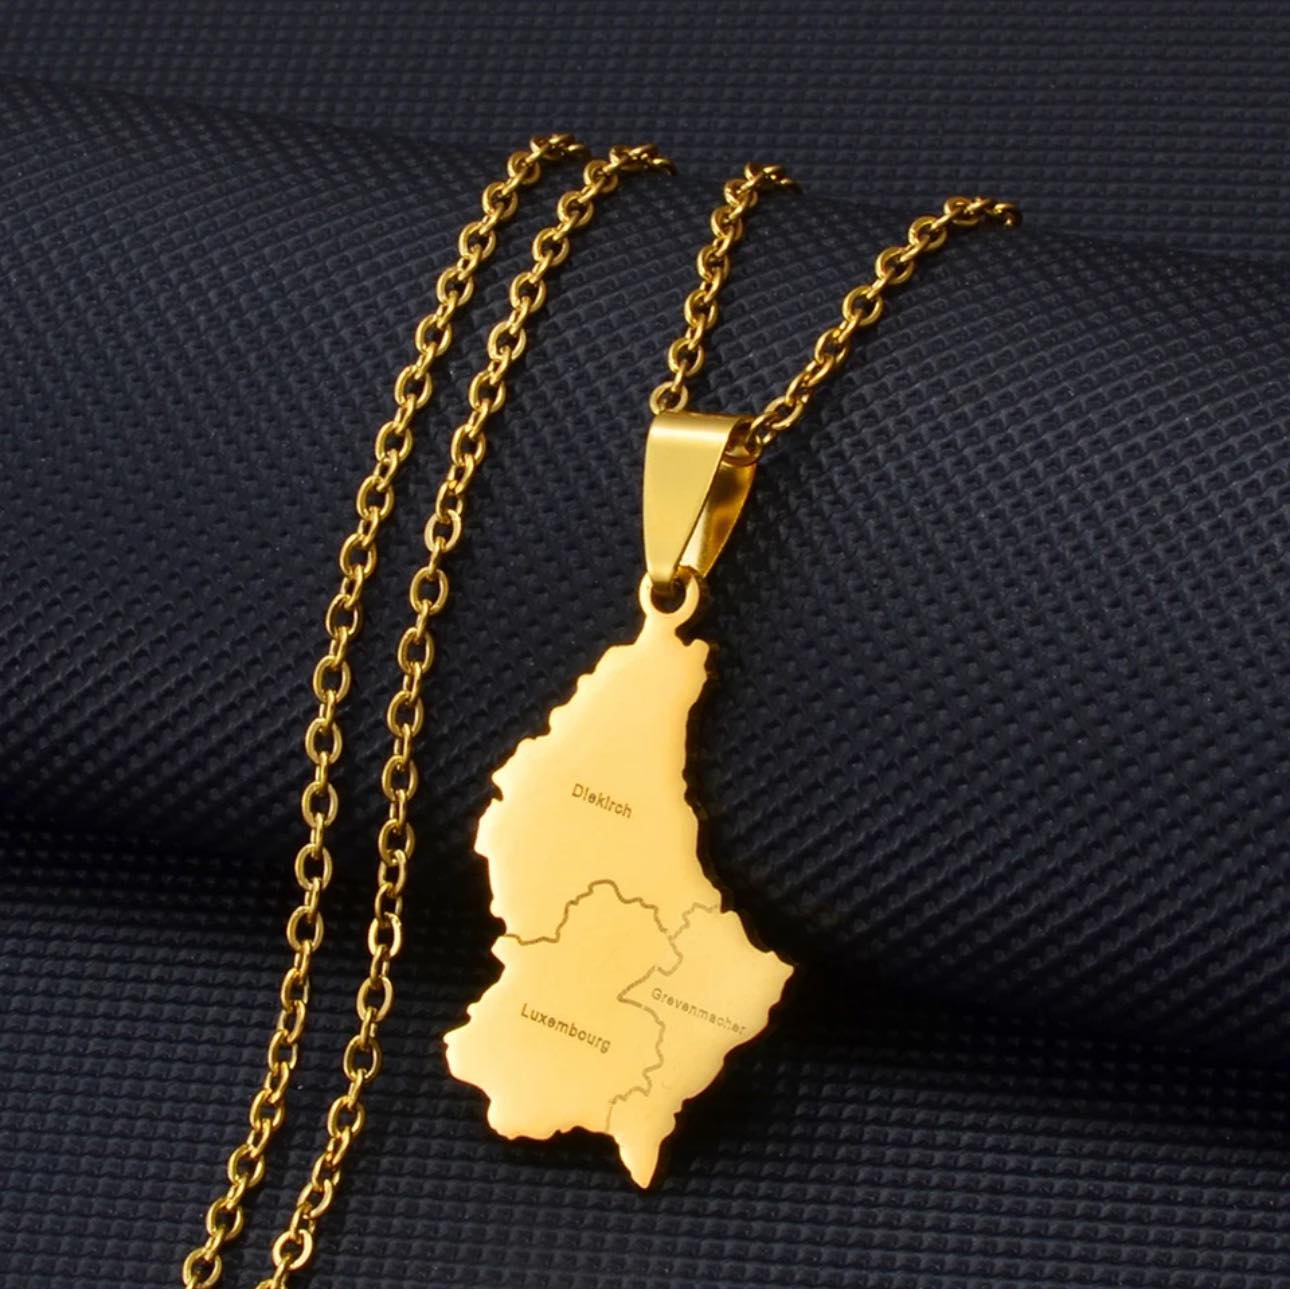 Luxembourg Map & Cities Necklace